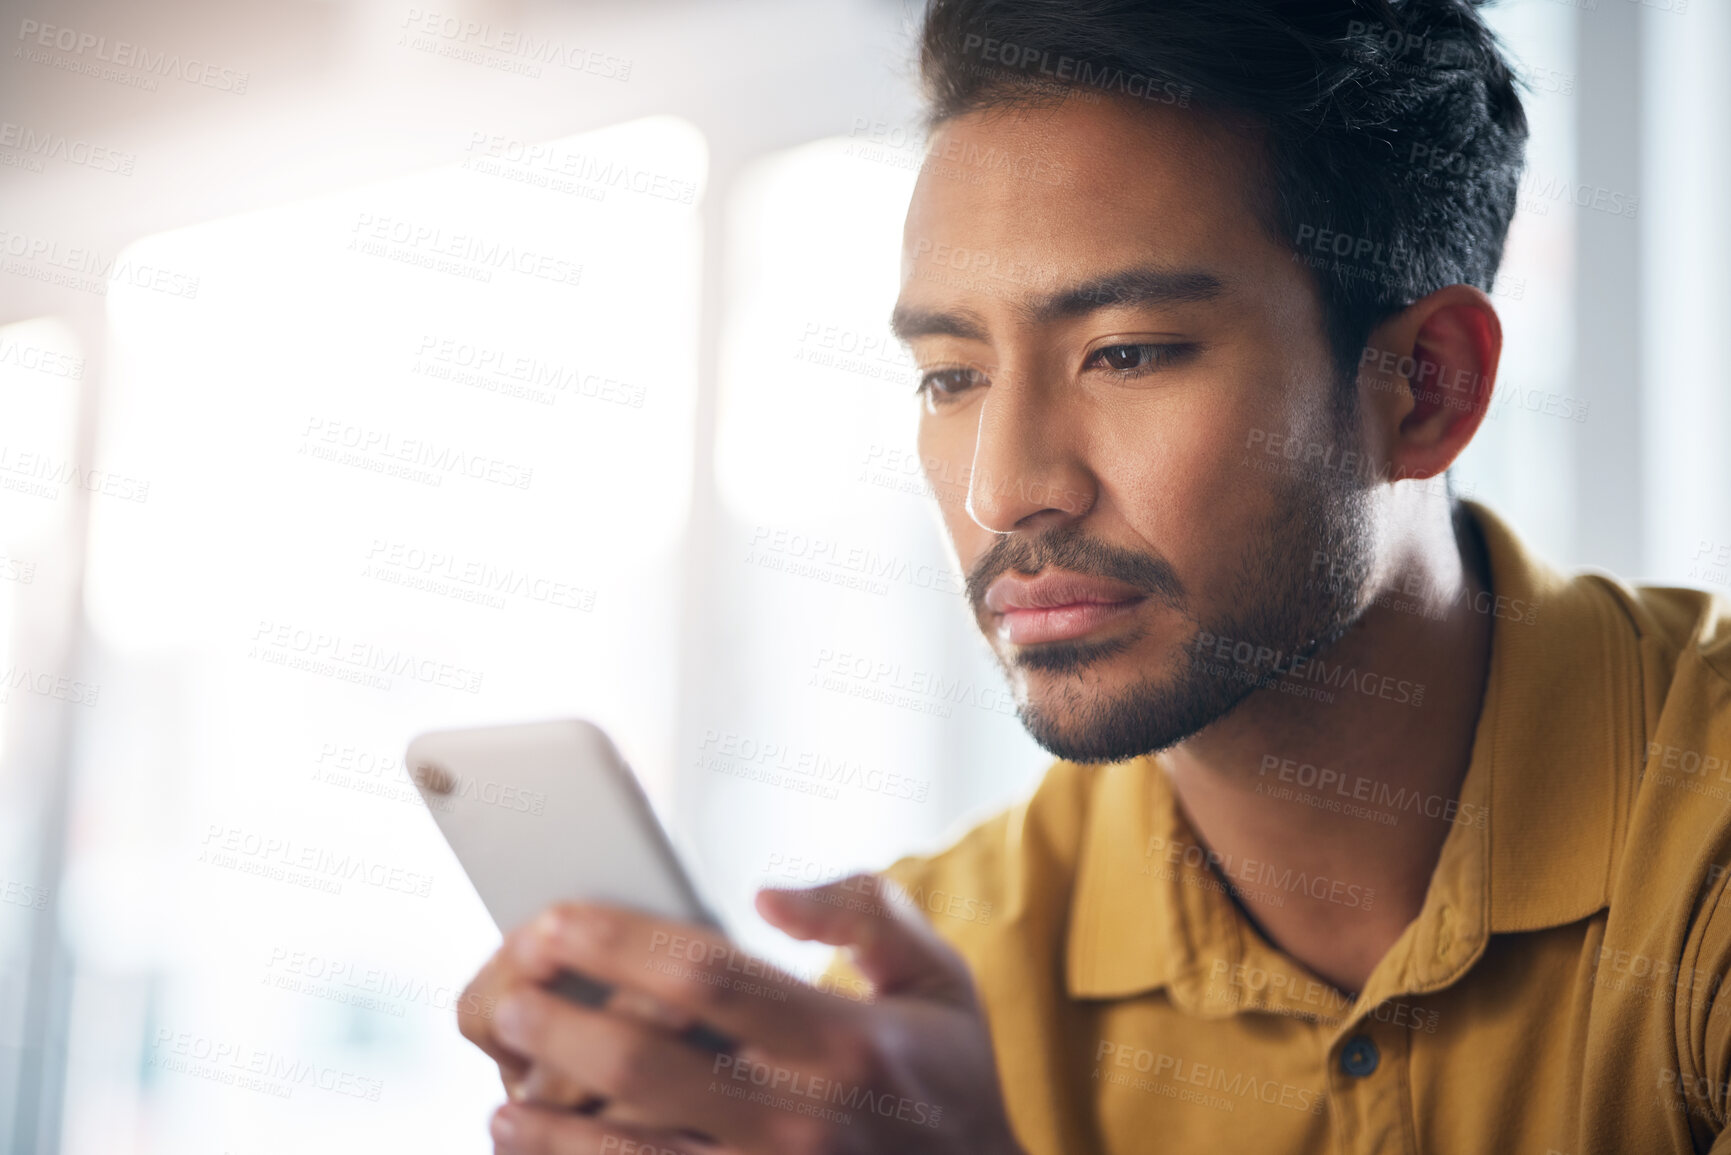 Buy stock photo Serious asian man, phone and social media for communication or networking at home. Focused male freelancer face on mobile smartphone app for chatting, texting or browsing on internet or research